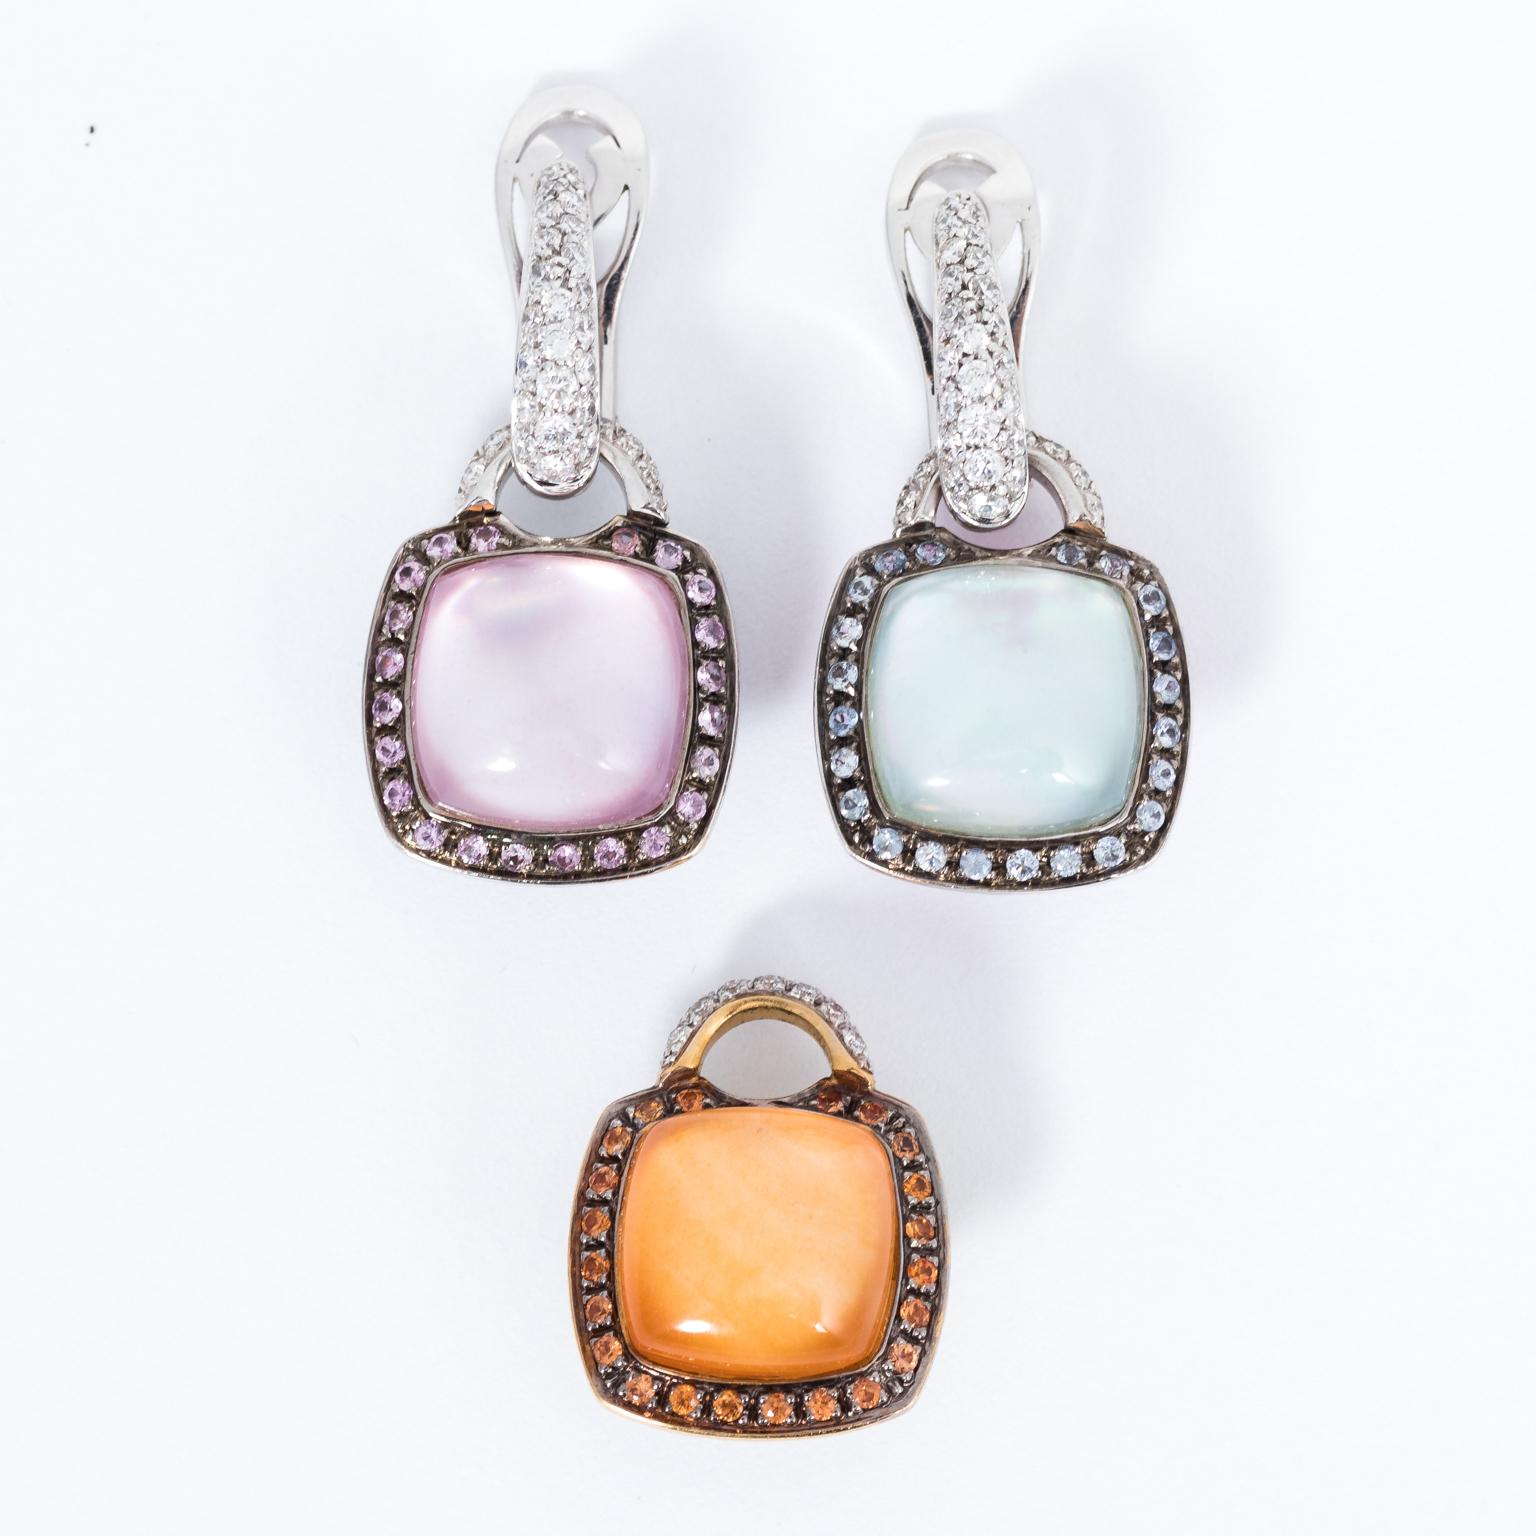 Pair of two sugar loaf shaped quartz earrings in orange, blue, and pink. The clip on earrings are set with brilliant cut diamonds and can be removed from the earring pendants. The earring pendants are 16 X 21 mm and are set with matching colored